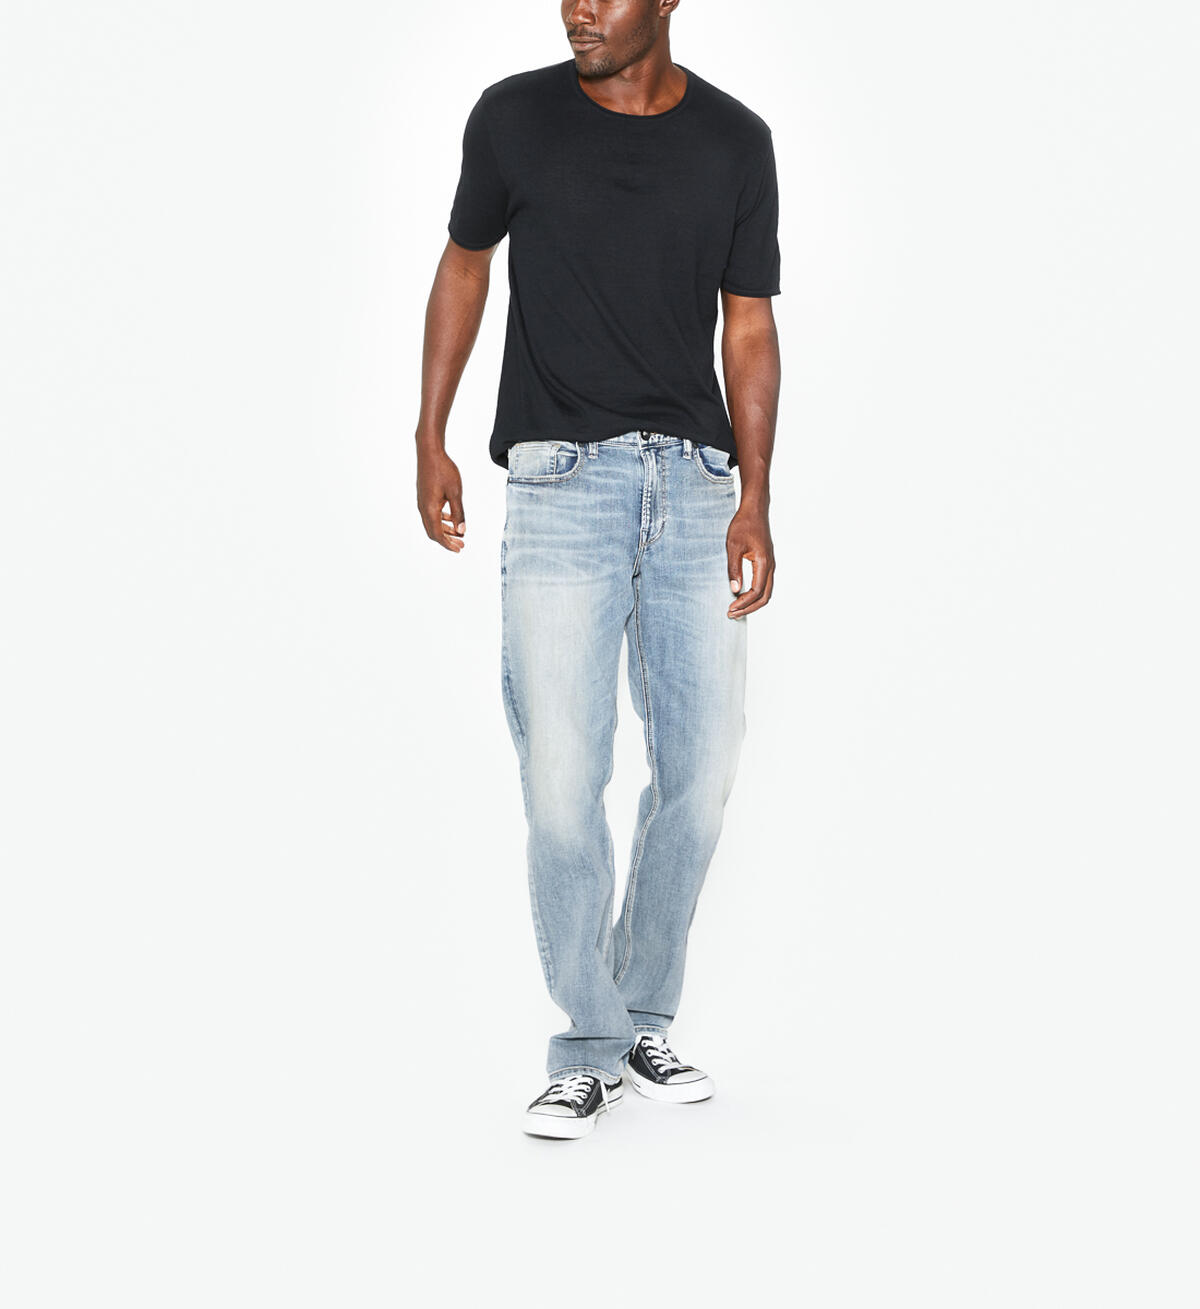 Grayson Easy Fit Straight Leg Jeans Final Sale, , hi-res image number 0